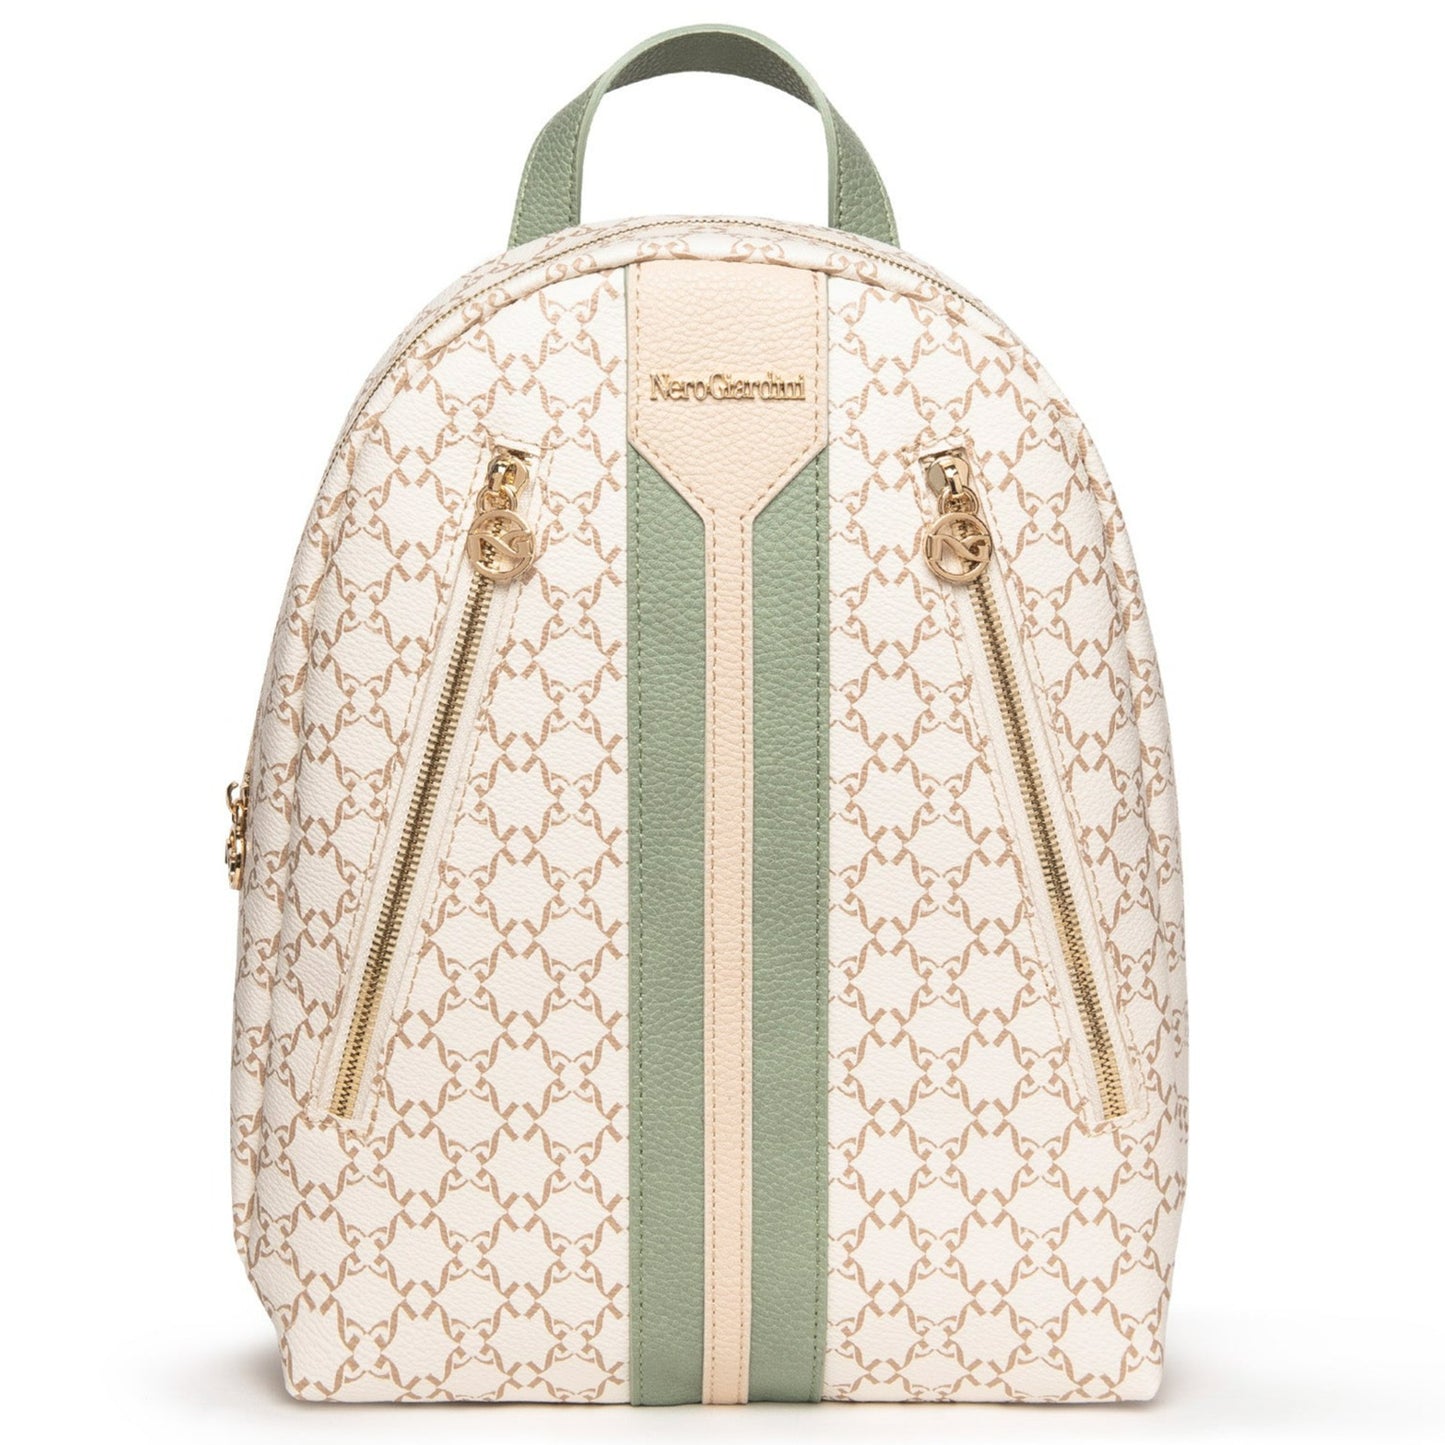 Backpack NeroGiardini beige base with texture sage inserts